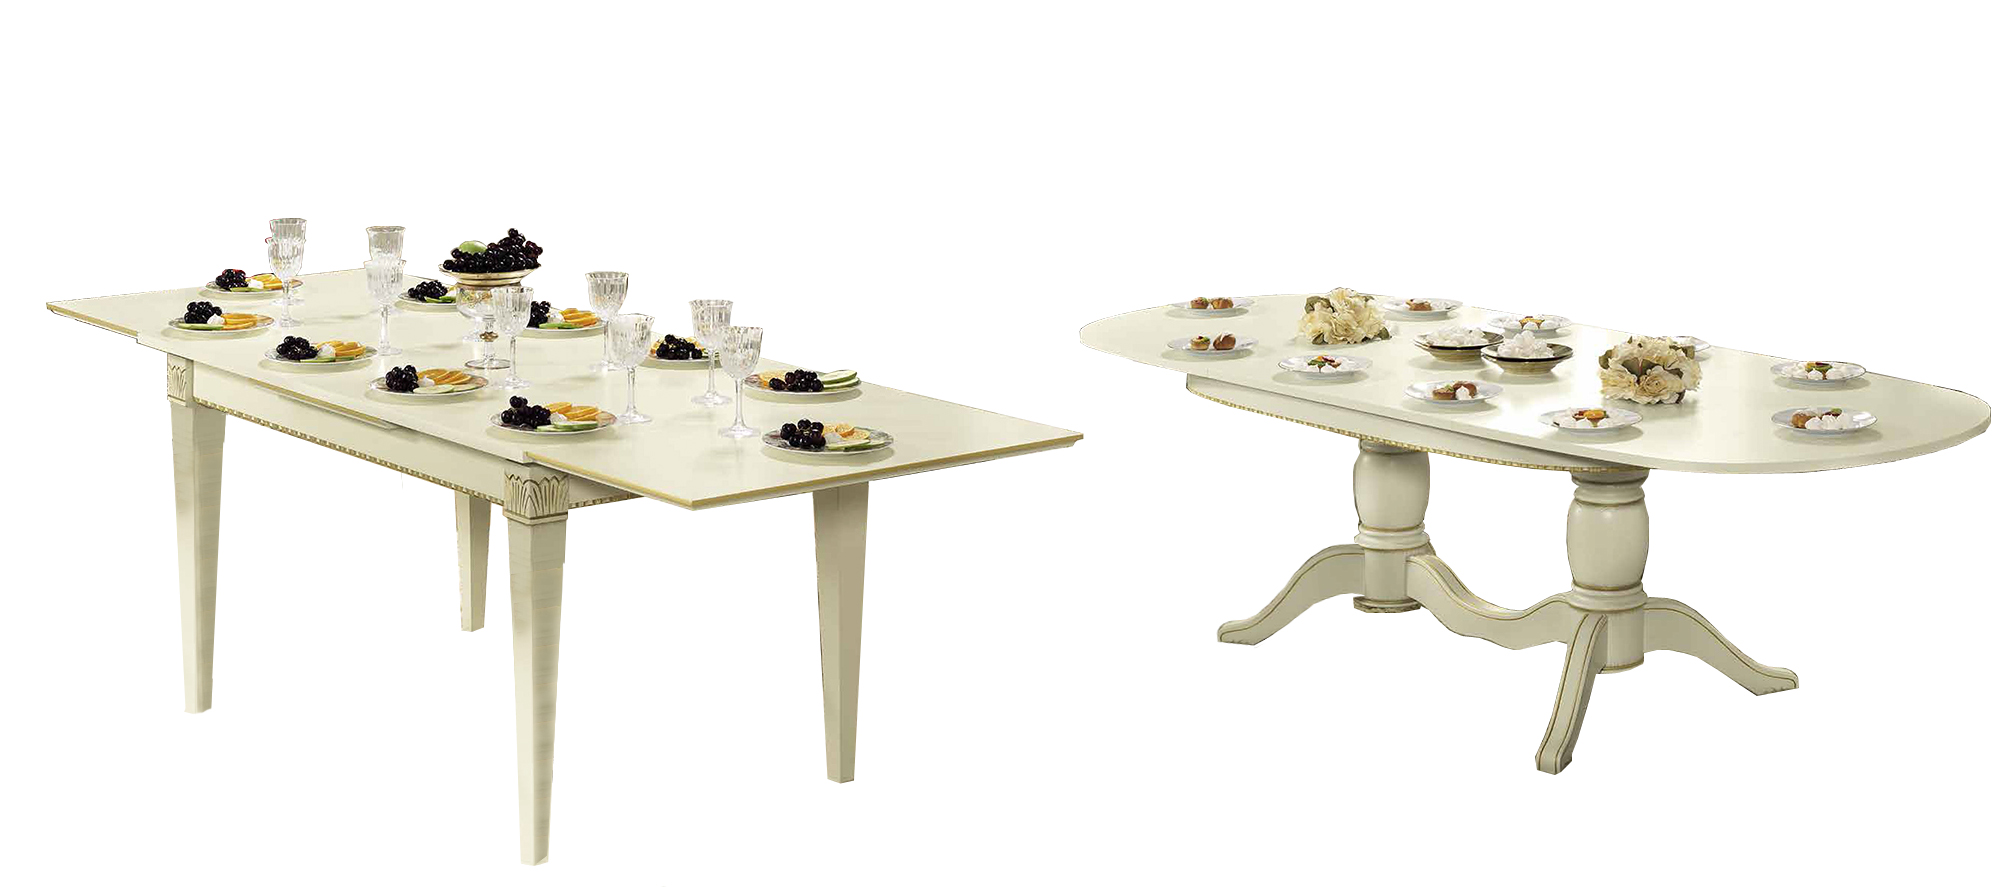 Dining Room Furniture Marble-Look Tables Treviso White Ash Tables